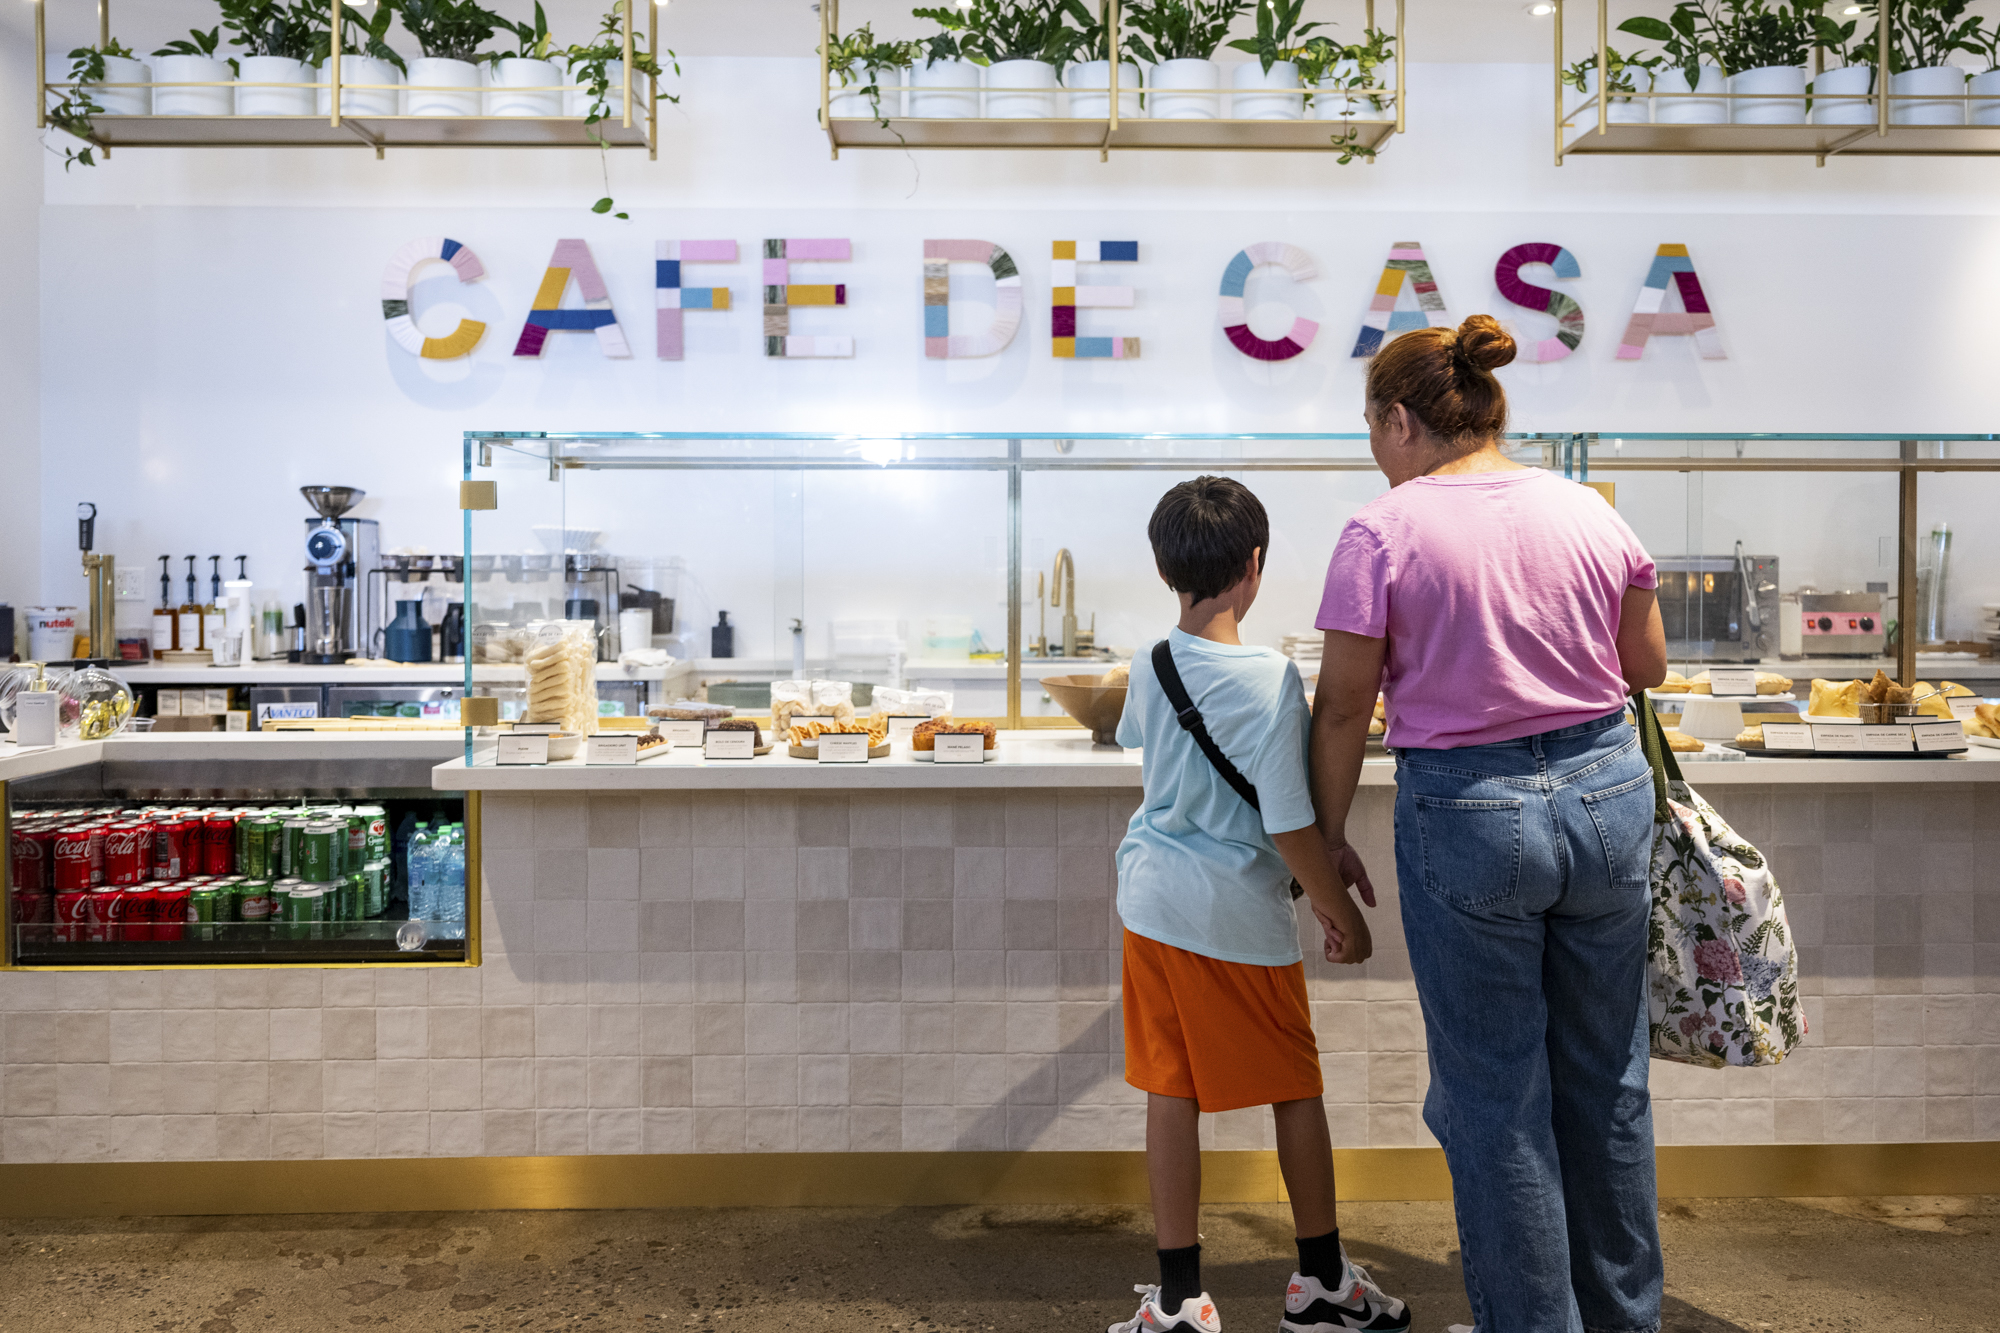 A woman and young boy peruse the pastry case at Cafe de Casa.